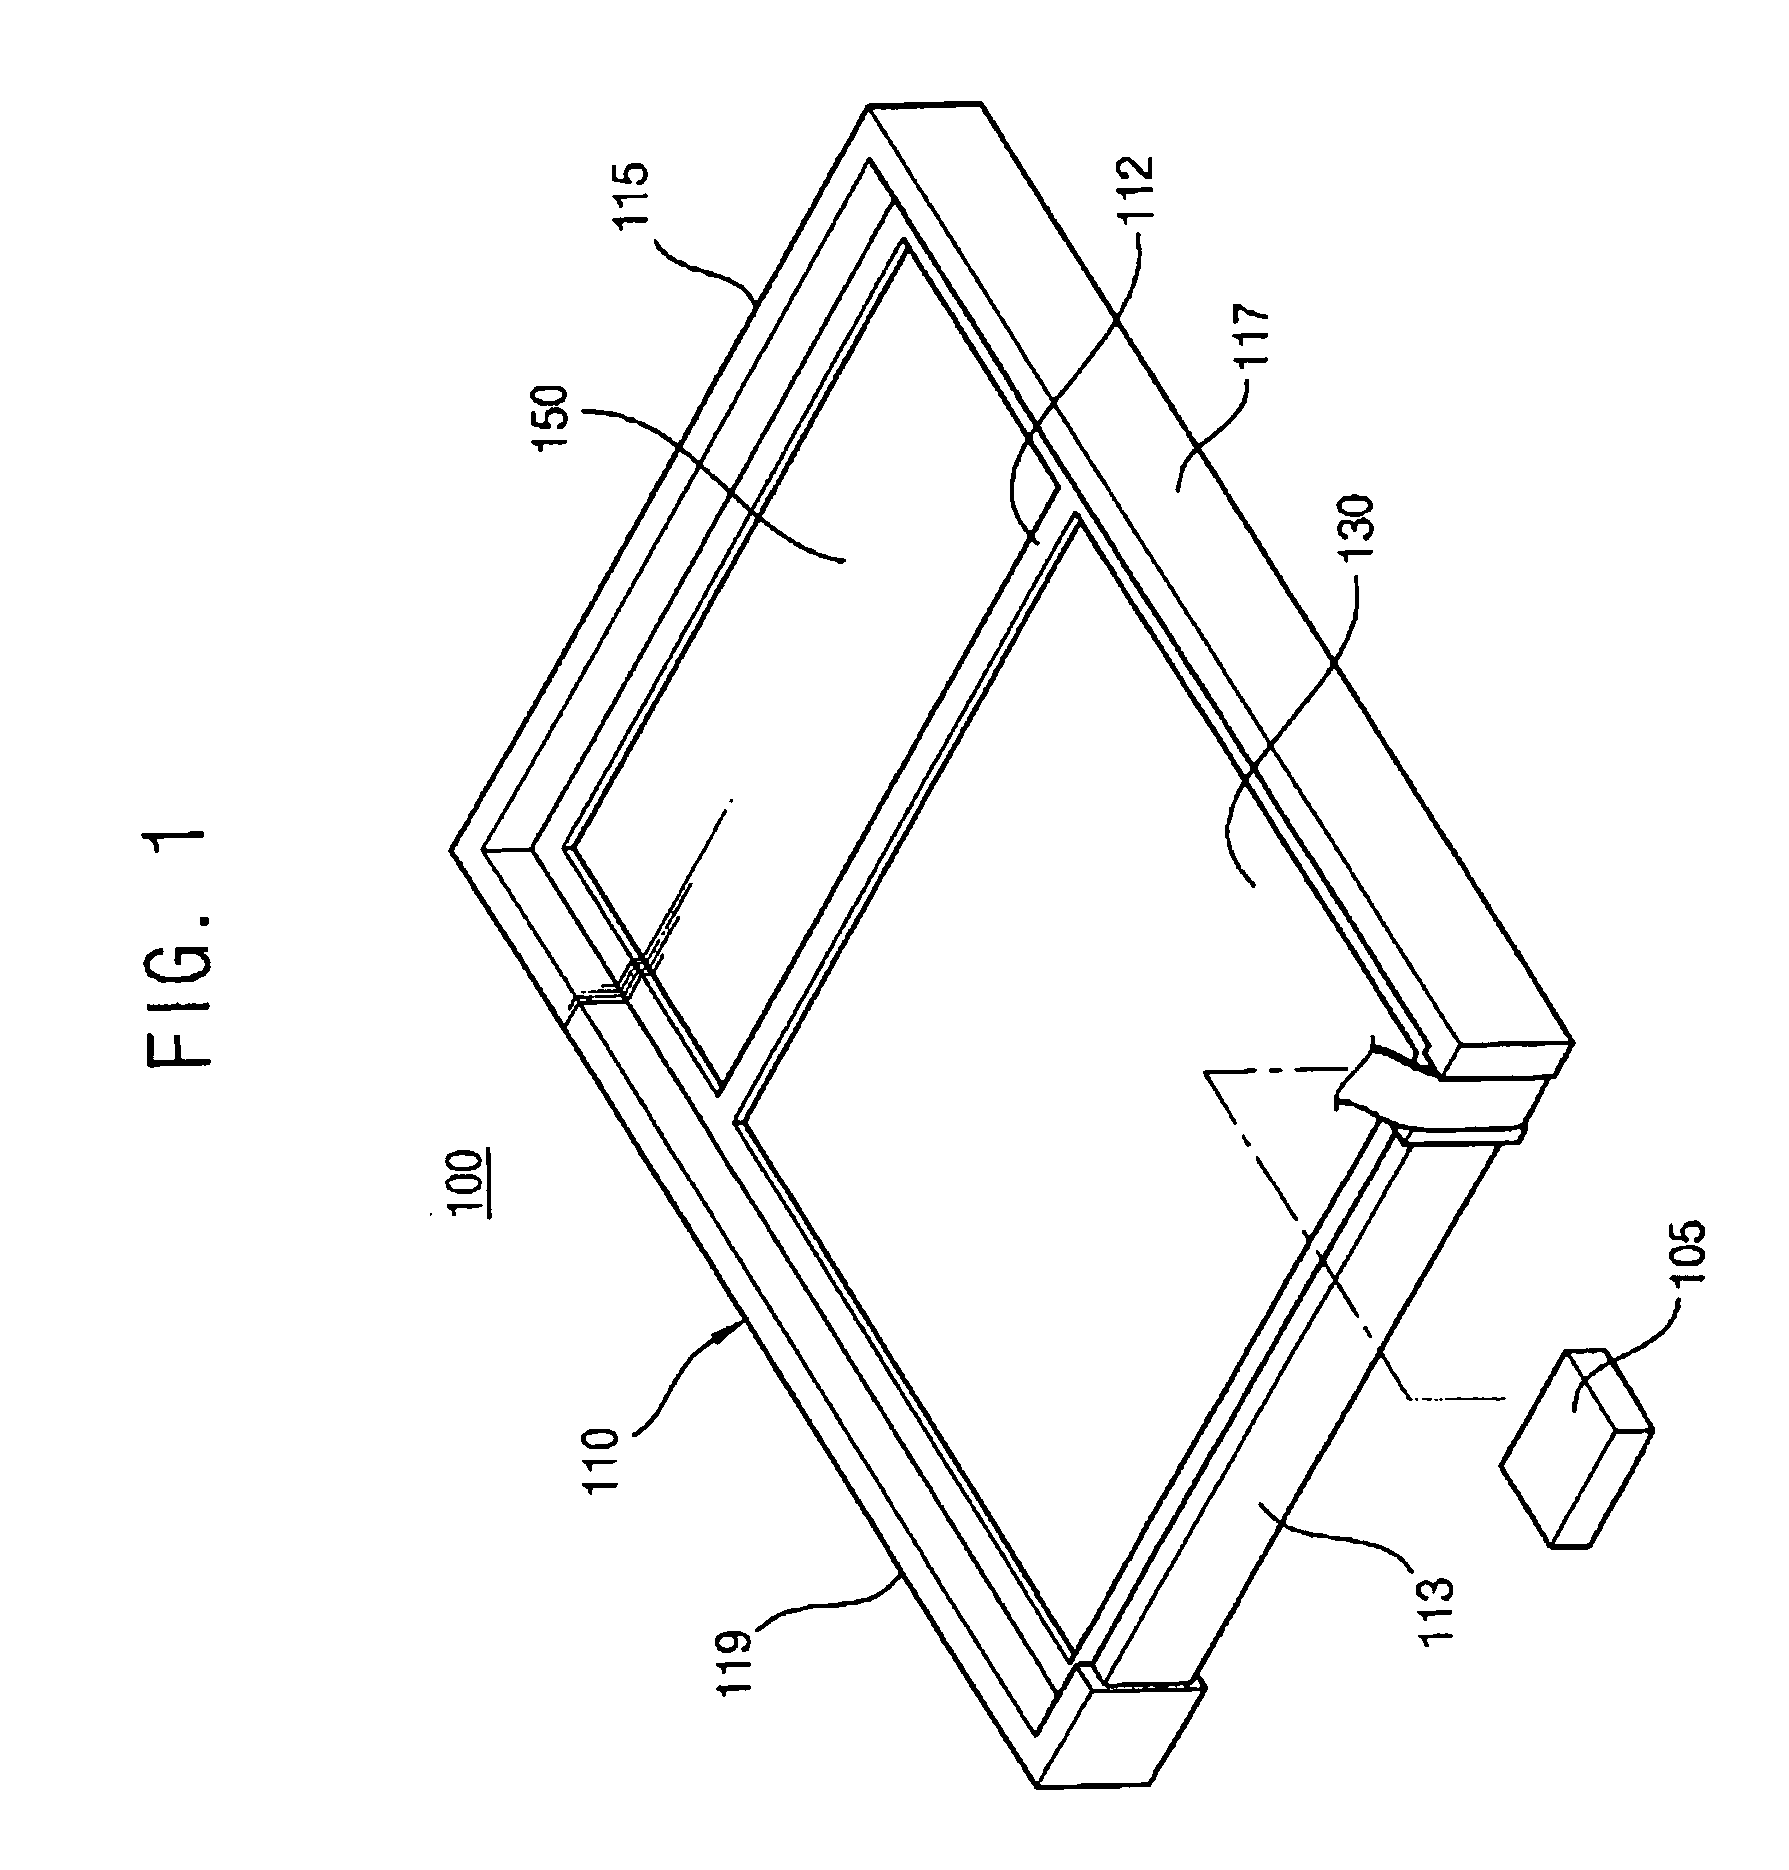 Backlight assembly, display device having the same, display substrate for the same and method of manufacturing the same